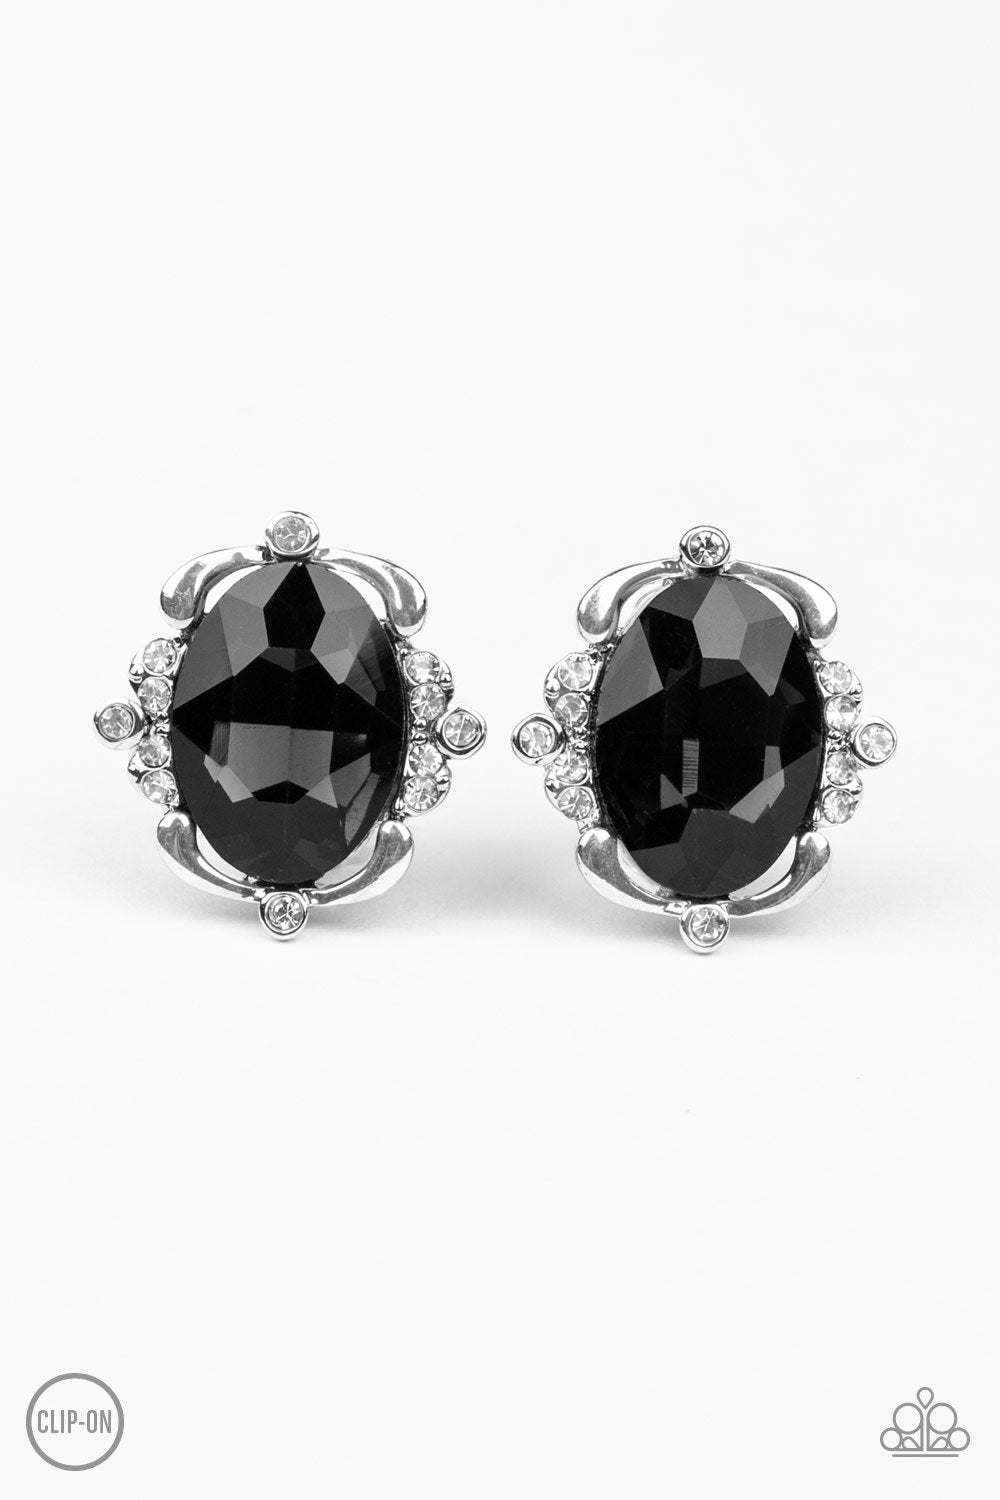 Regally Radiant Black Clip On Earrings - Paparazzi Accessories - lightbox -CarasShop.com - $5 Jewelry by Cara Jewels